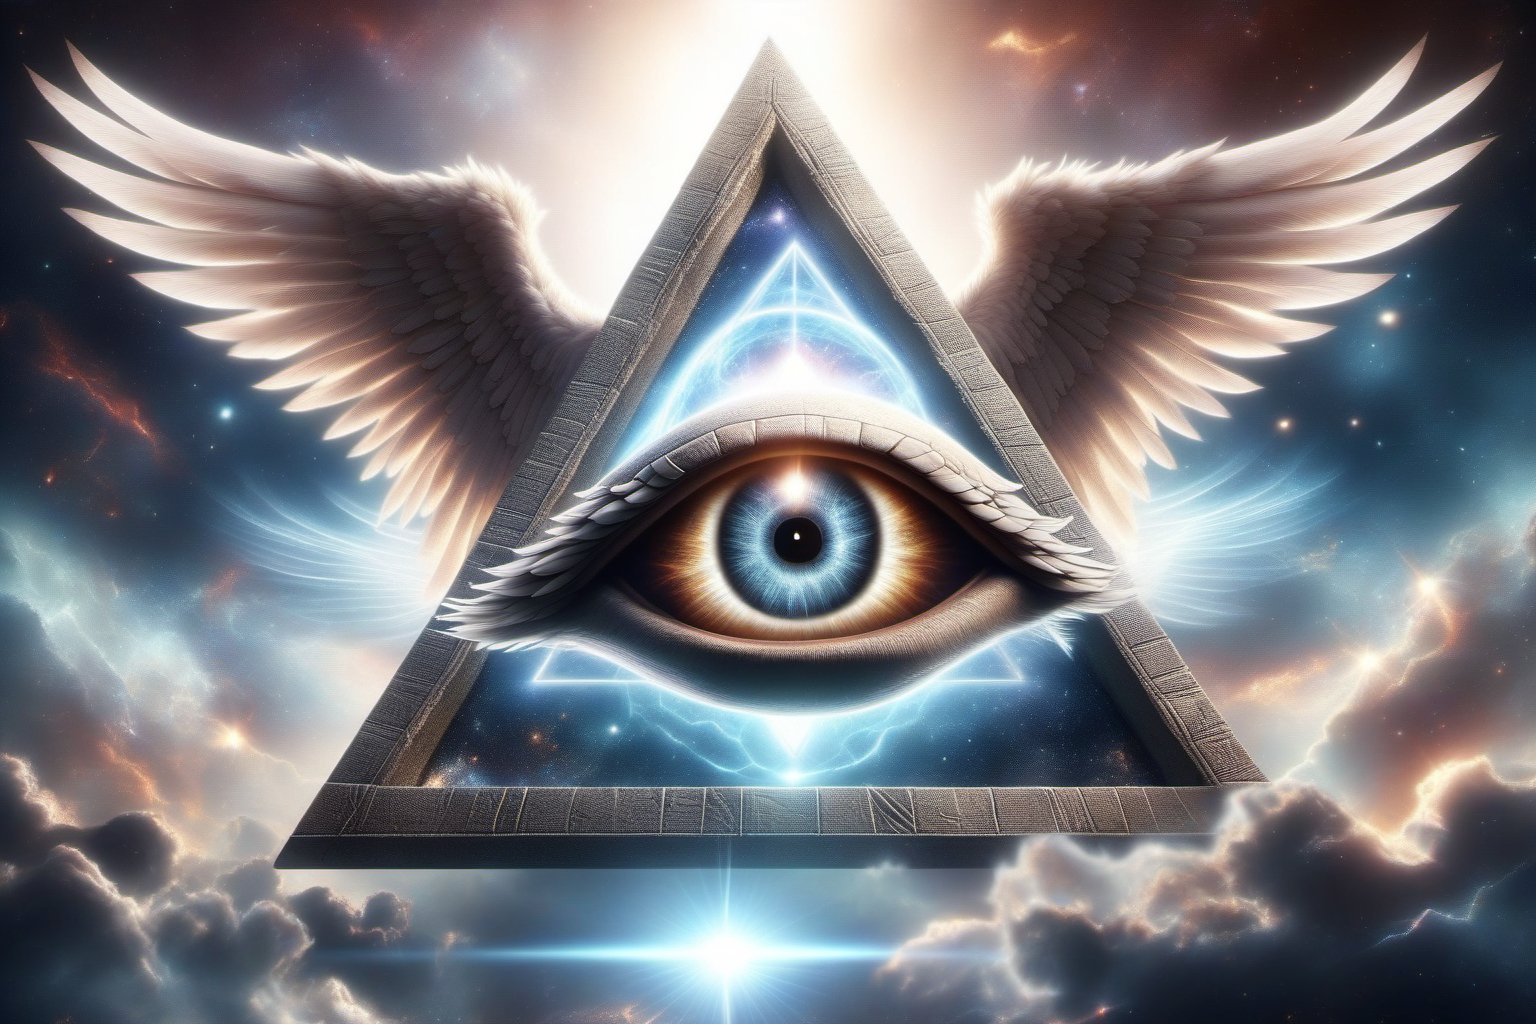 a hyper realistic picture of a illuminati eye in a pyramid form with angel wings, flying in the sky, space backdrop